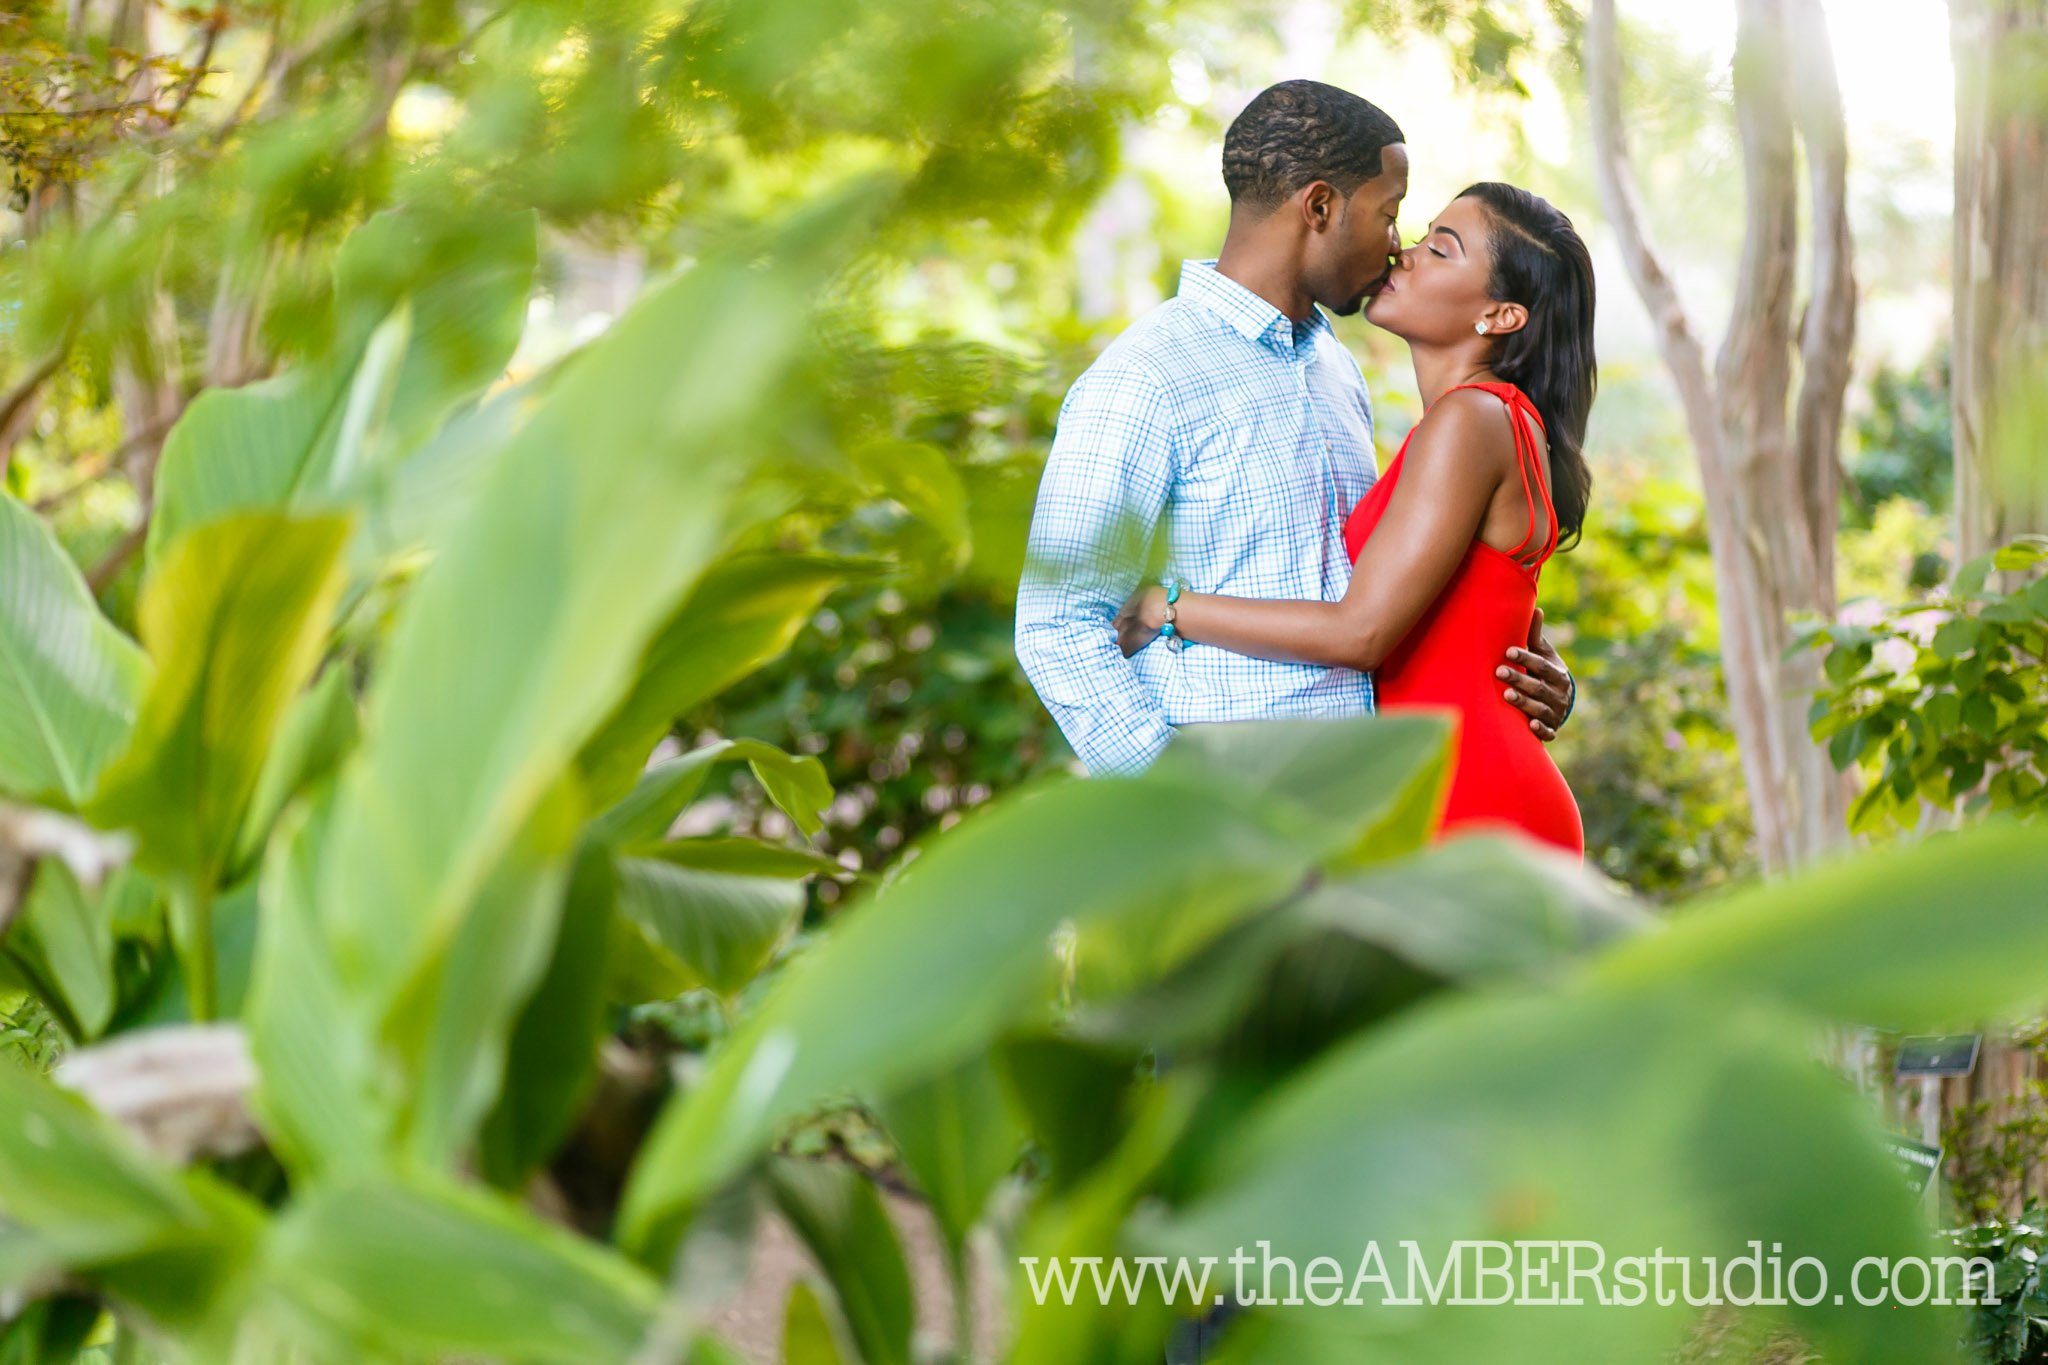 black-wedding-photographer-dallas-texas-engagement-photos-amber-knowles-studio-fort-worth-botanical-gardens-red-dress-suit-african-american-couple-cc0006